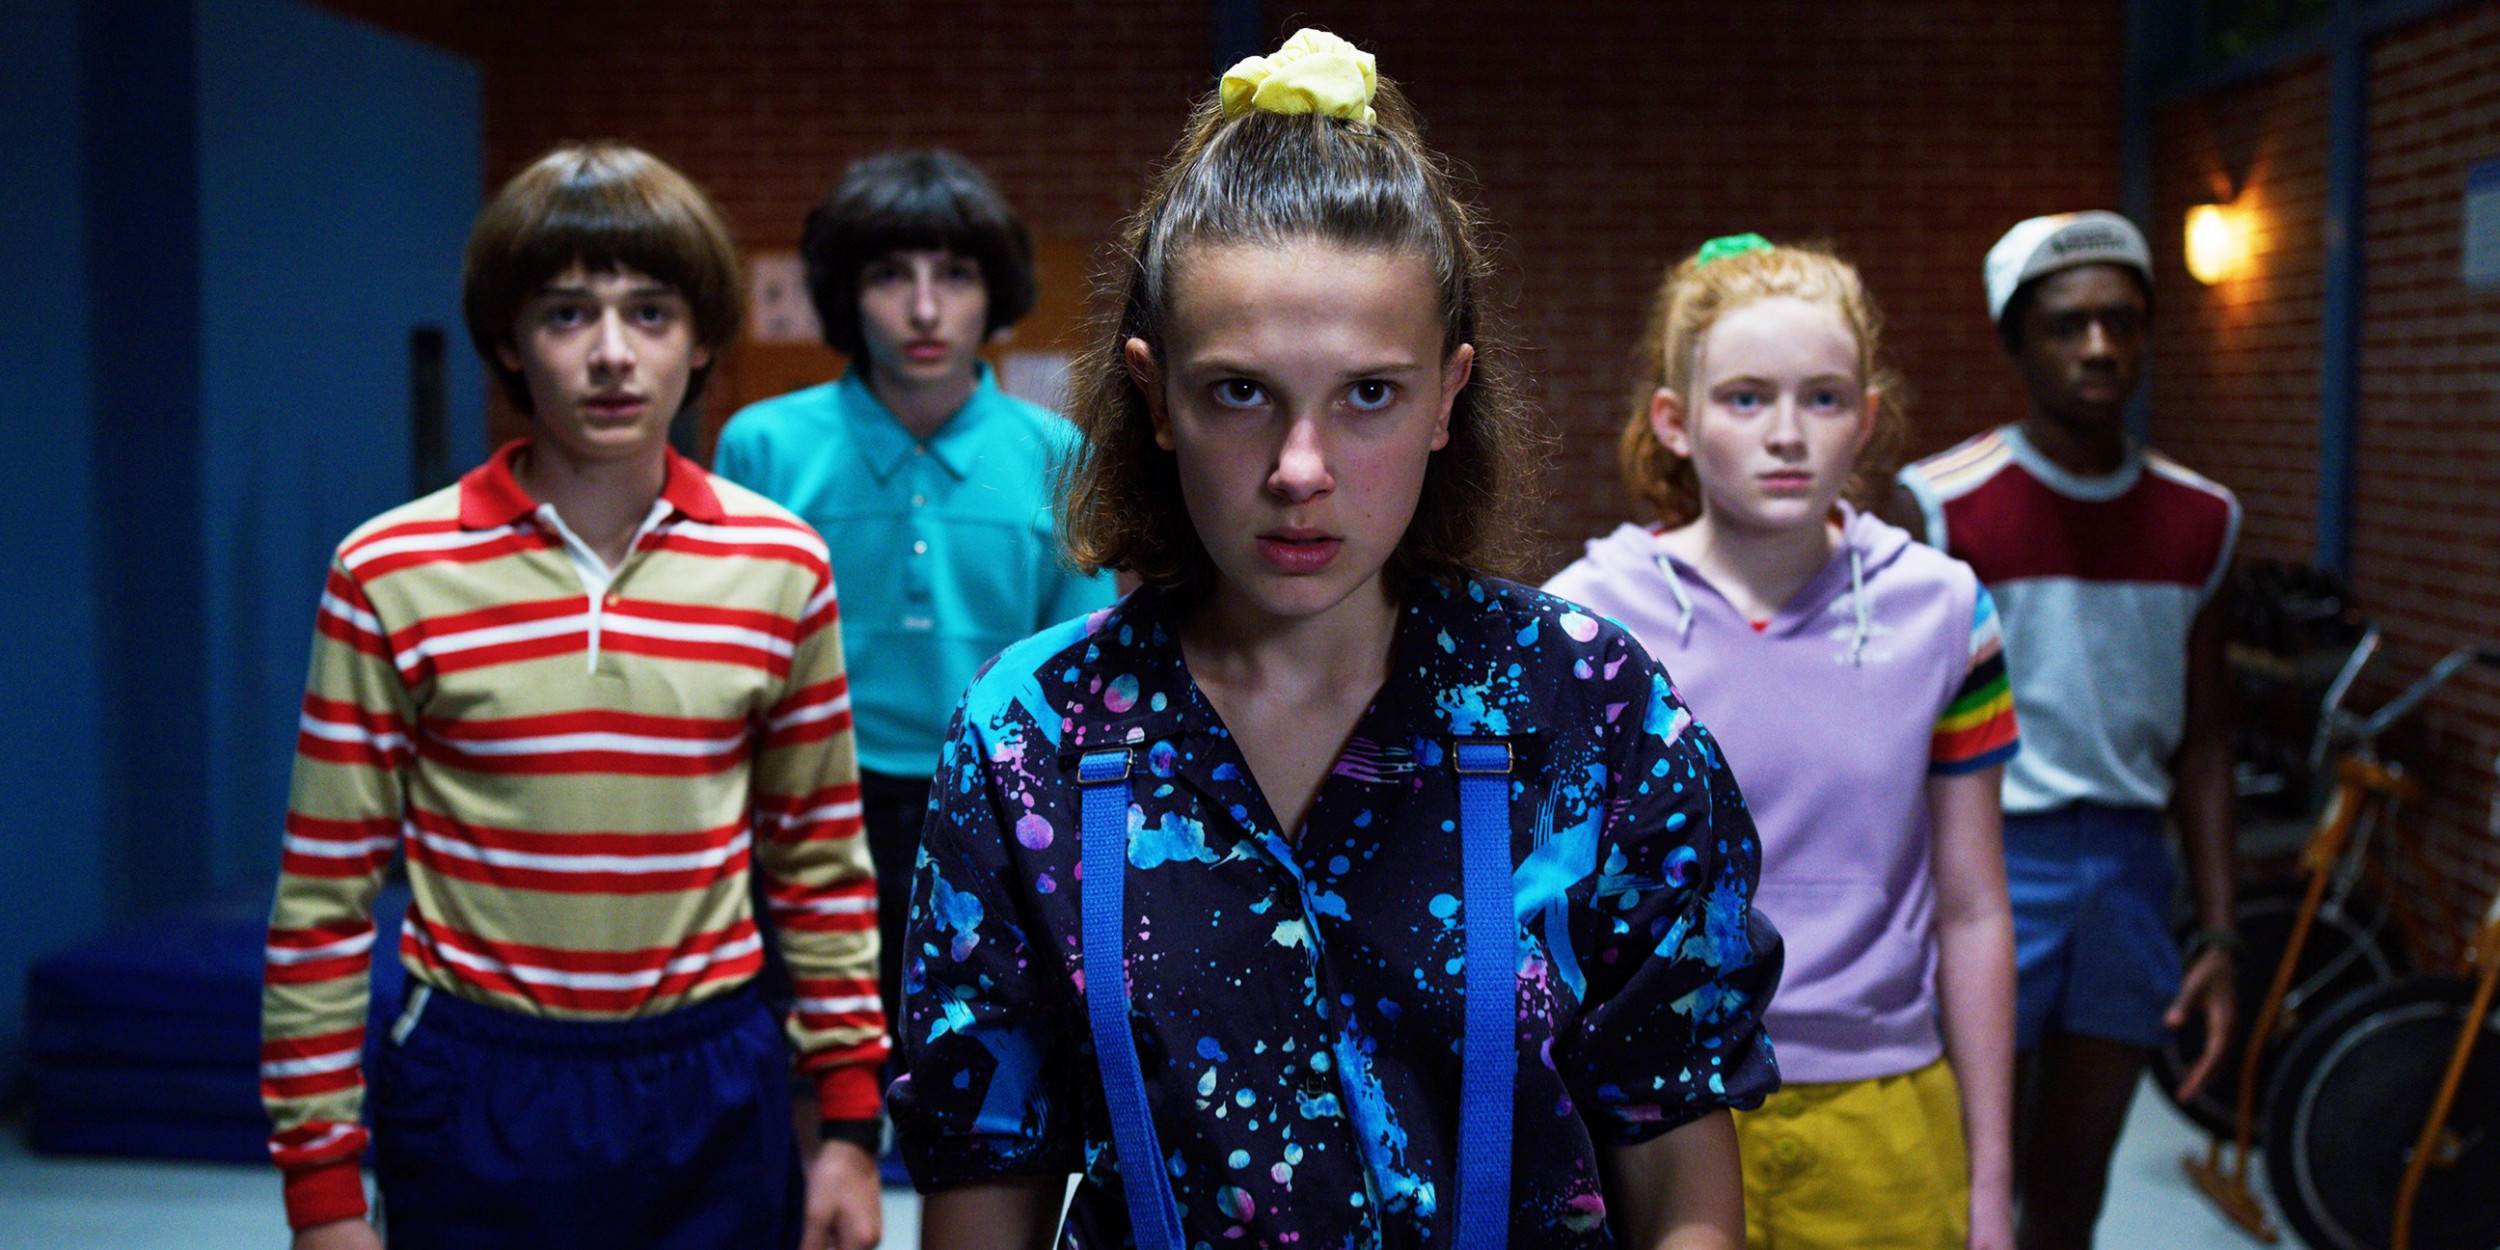 'Stranger Things' Season 4 May Already Be Filming: Leaked Images of